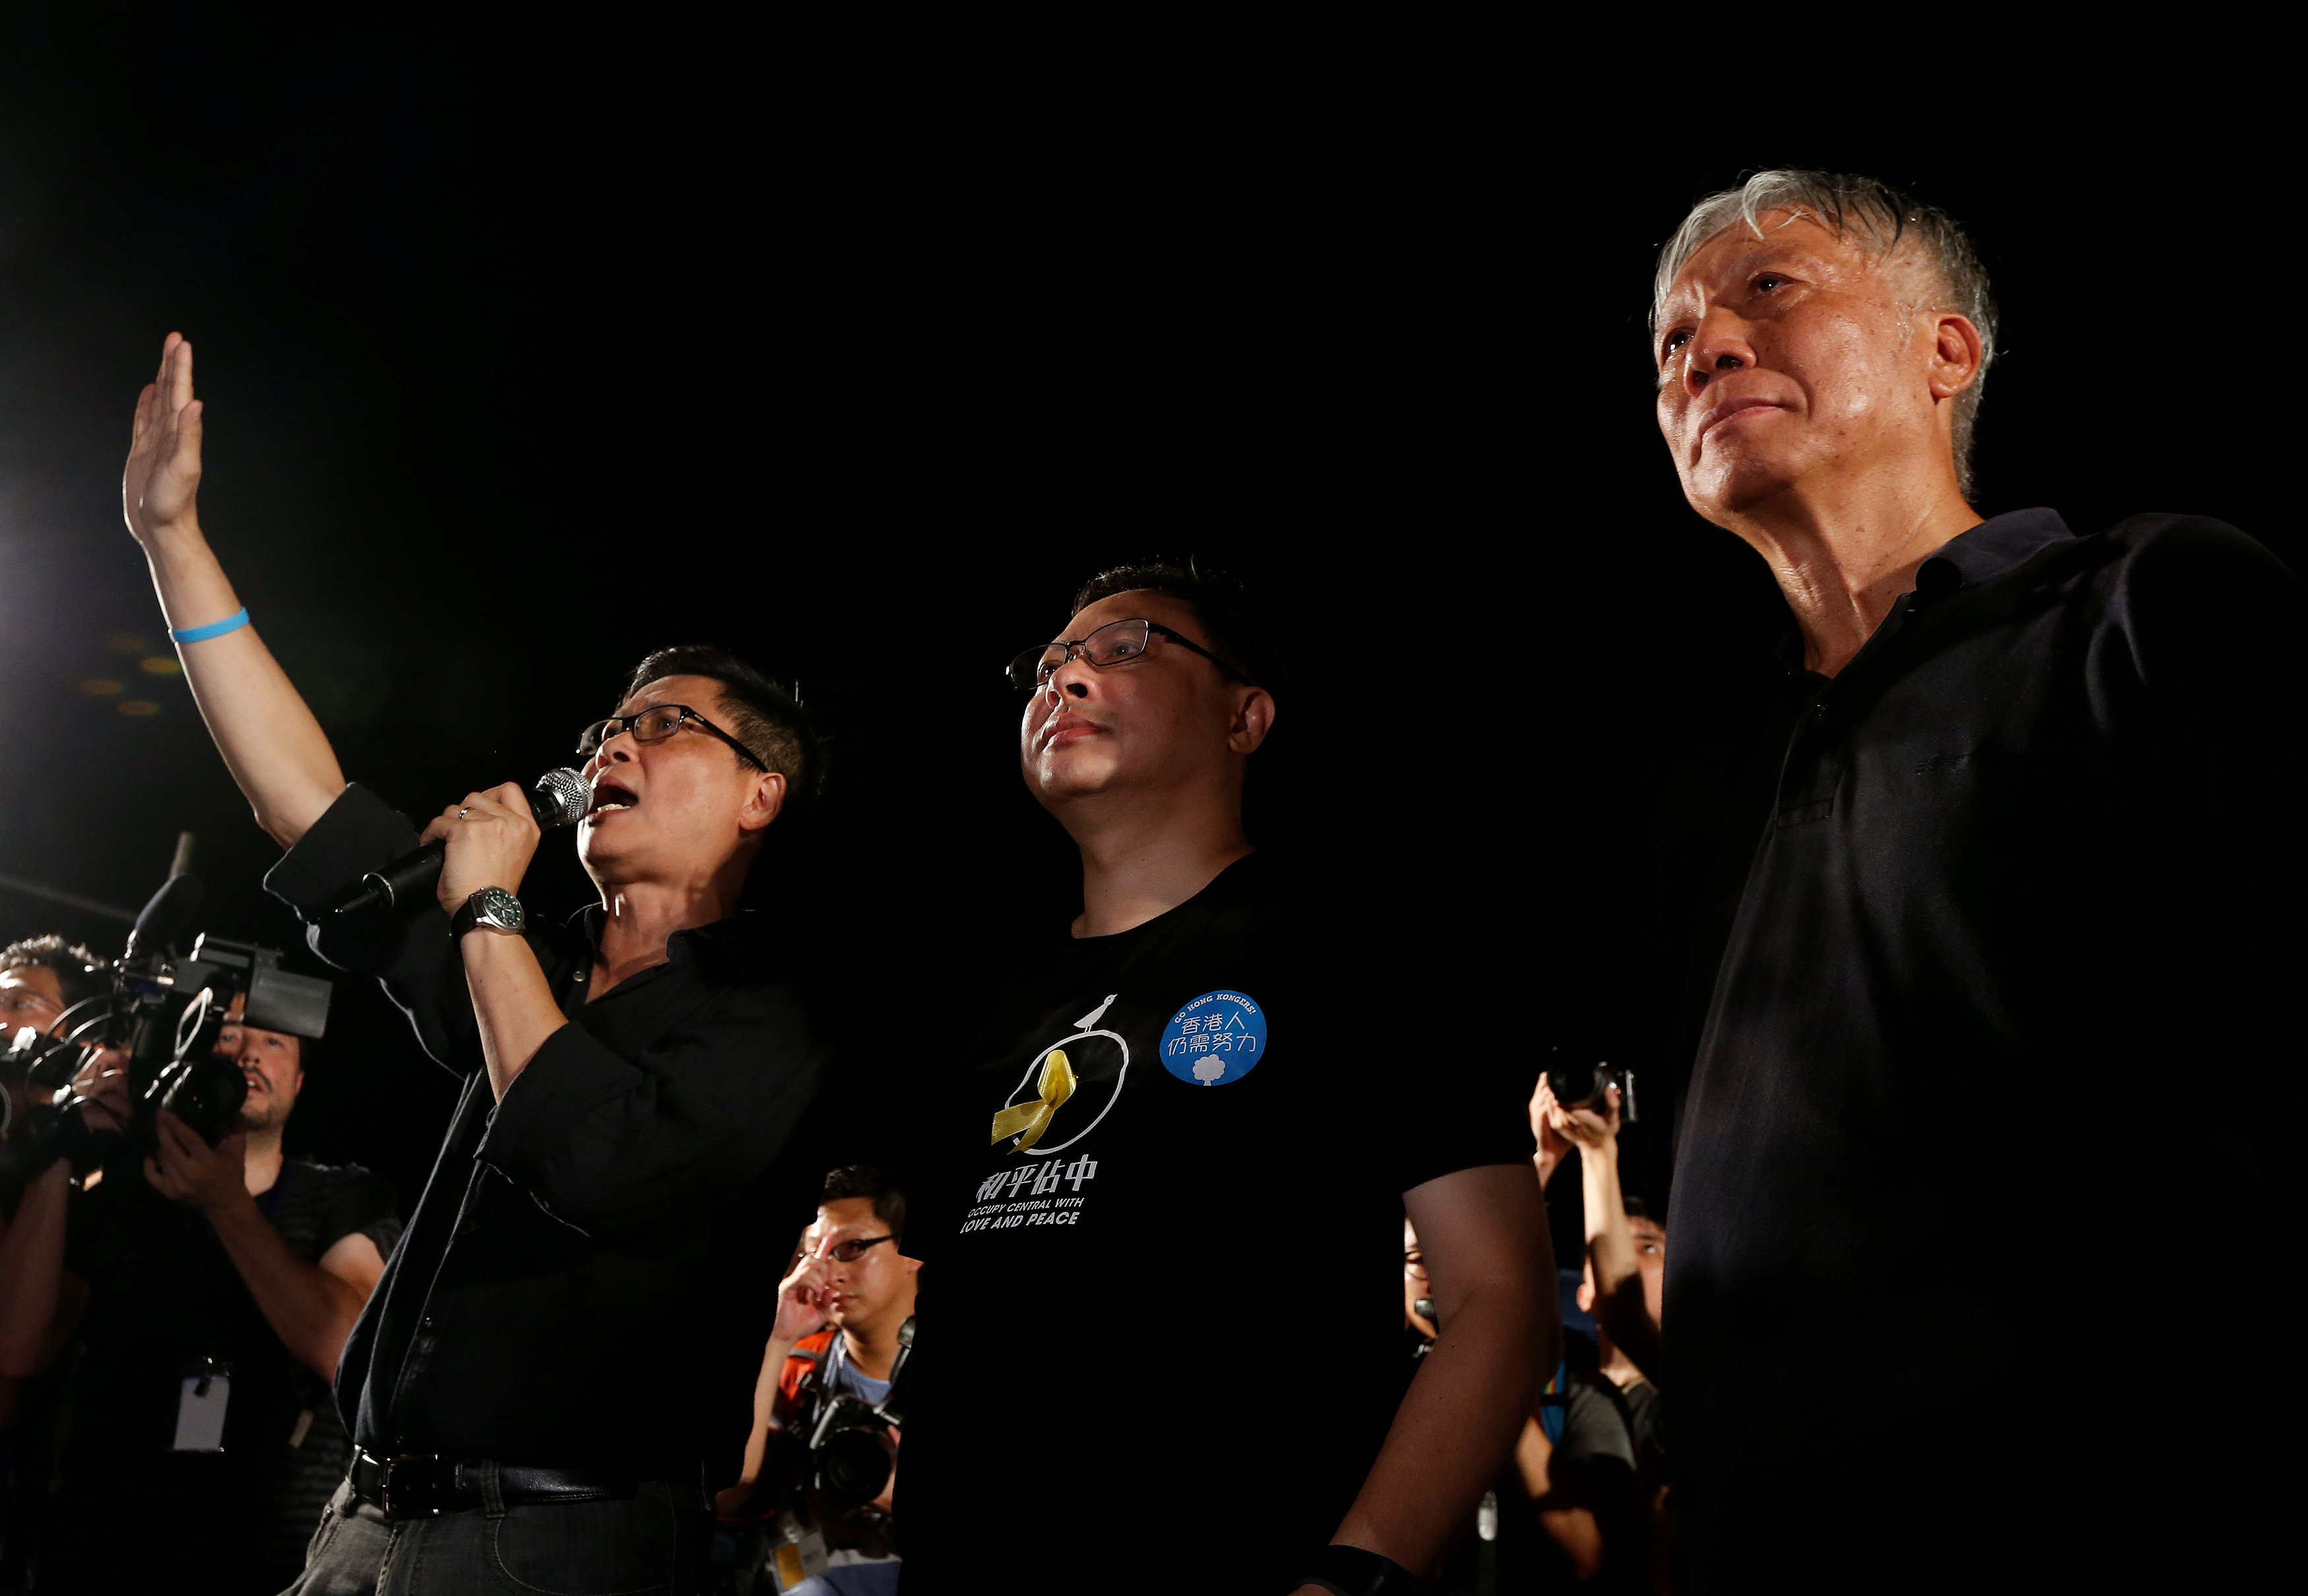 Hong Kong protest leaders told they face charges day after new leader chosen